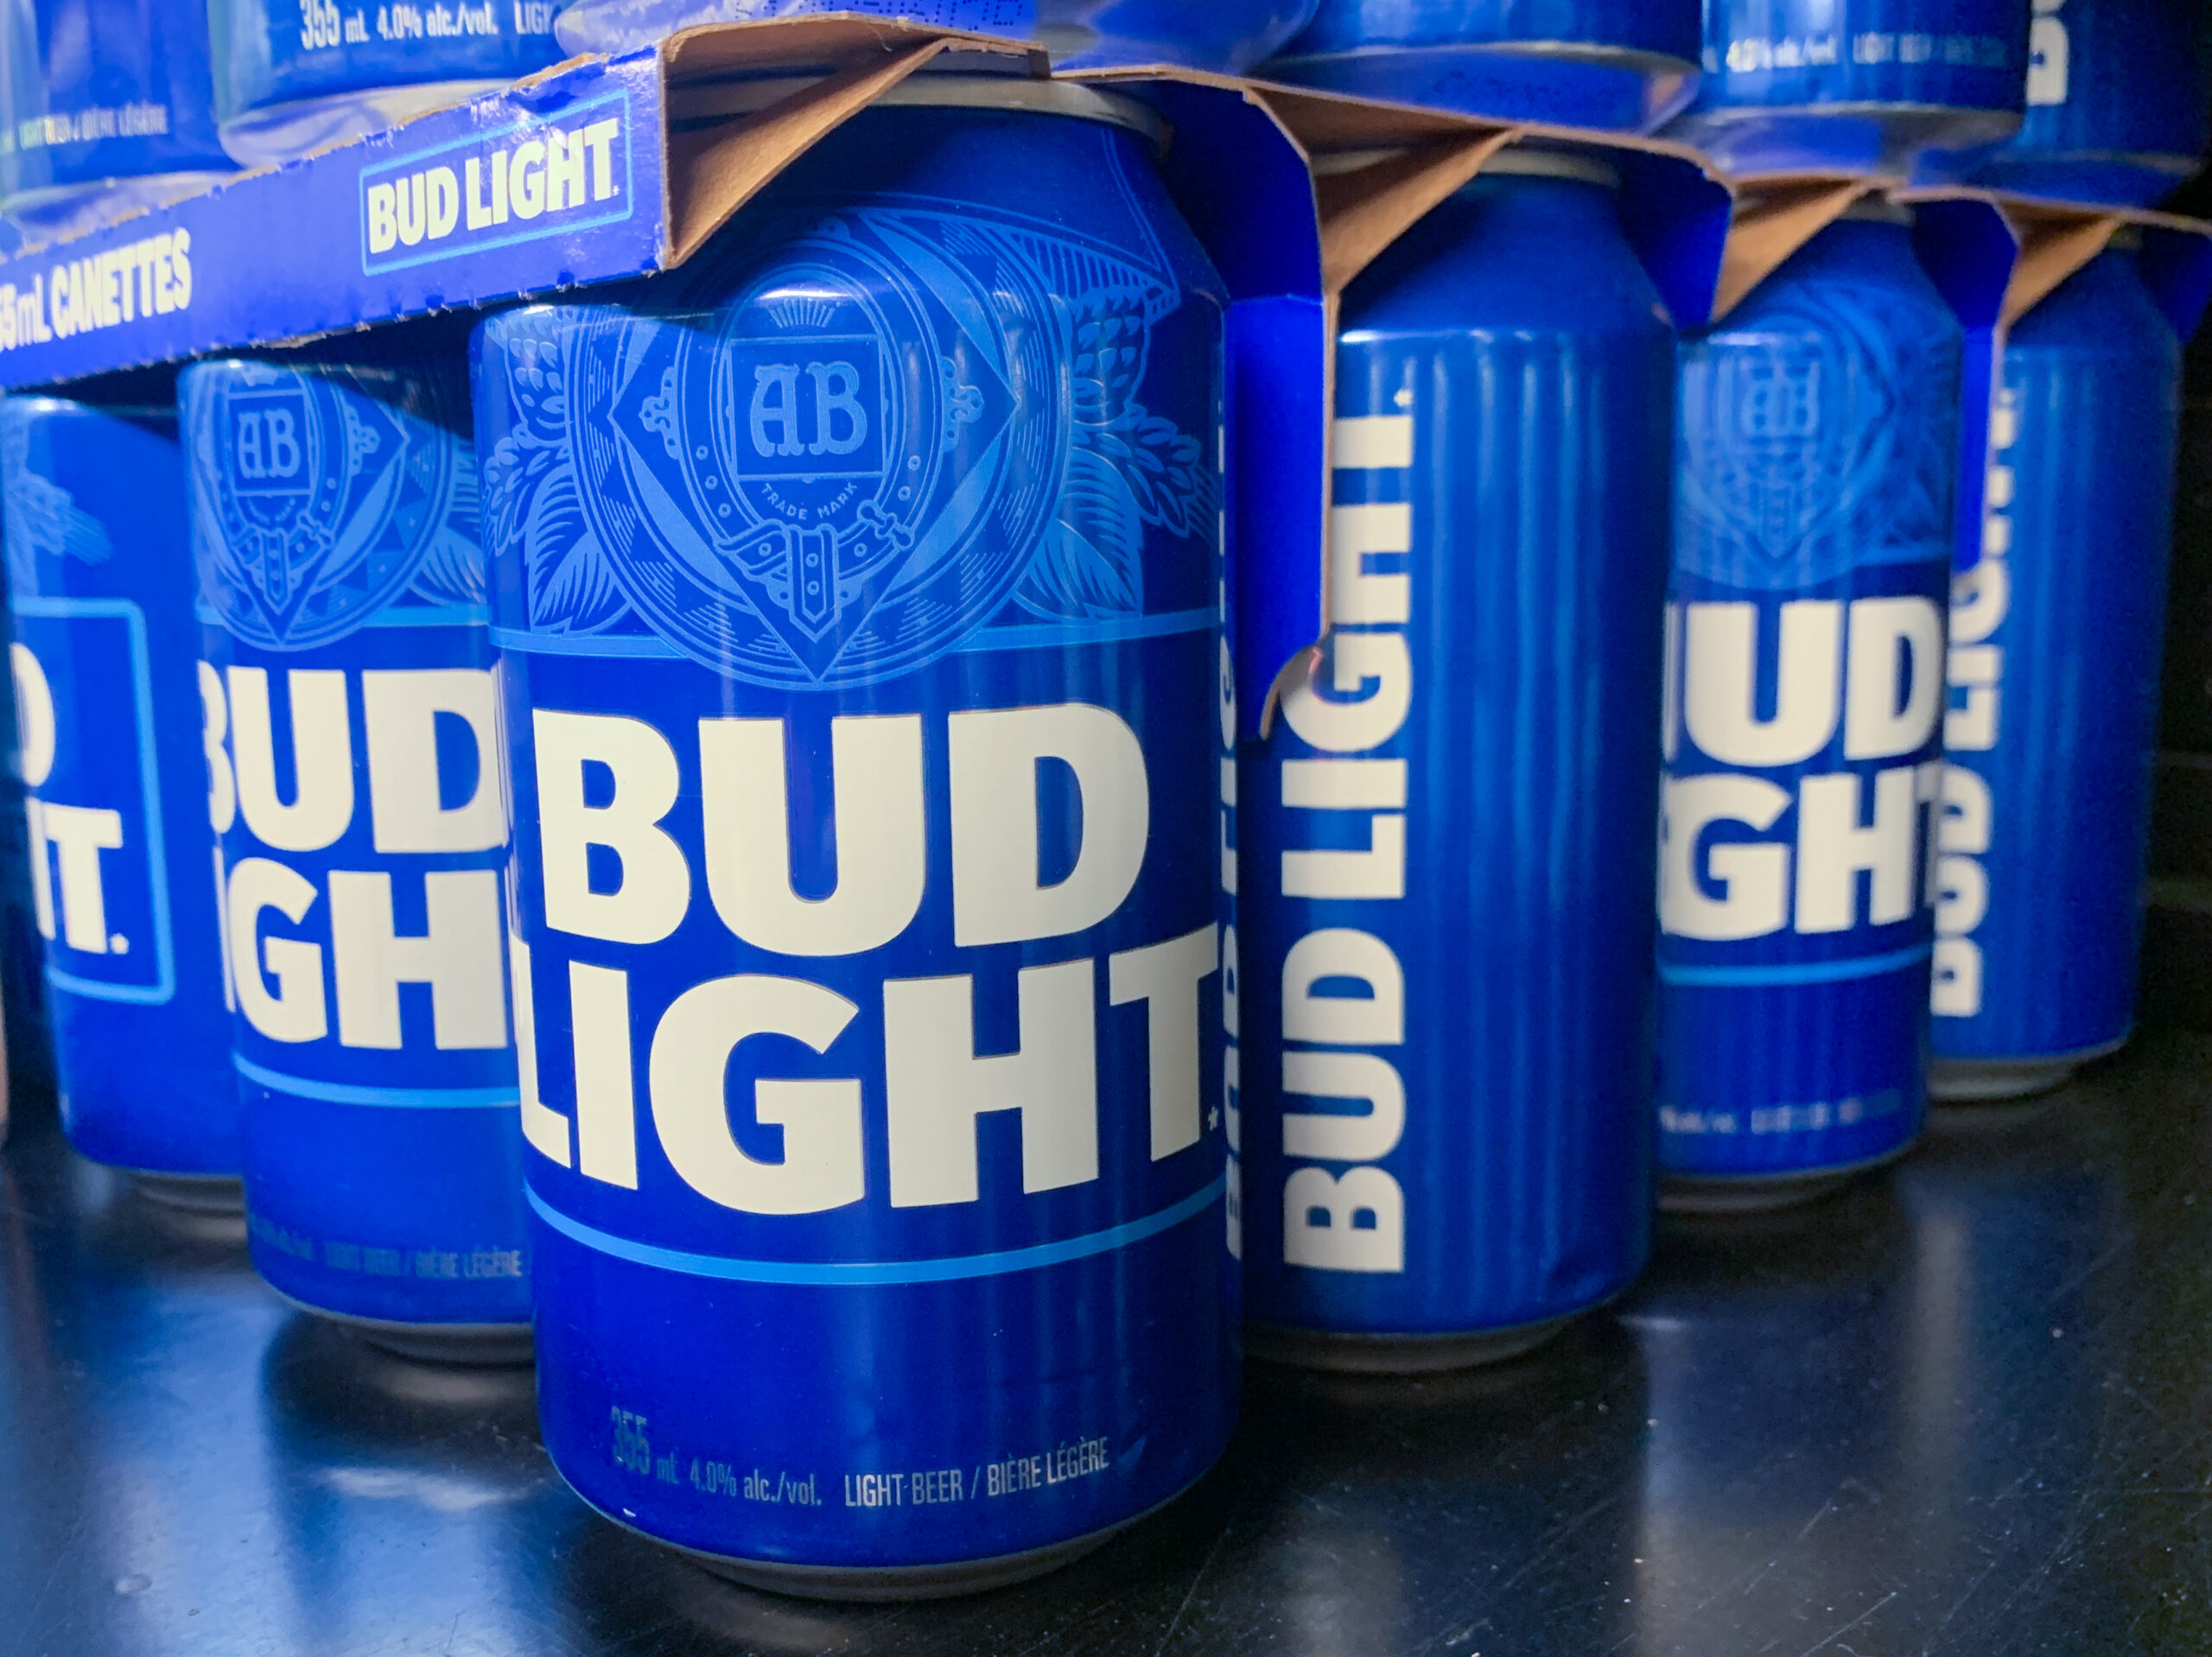 Leftists mastered the art of successful boycotts, until Bud Light stepped in.